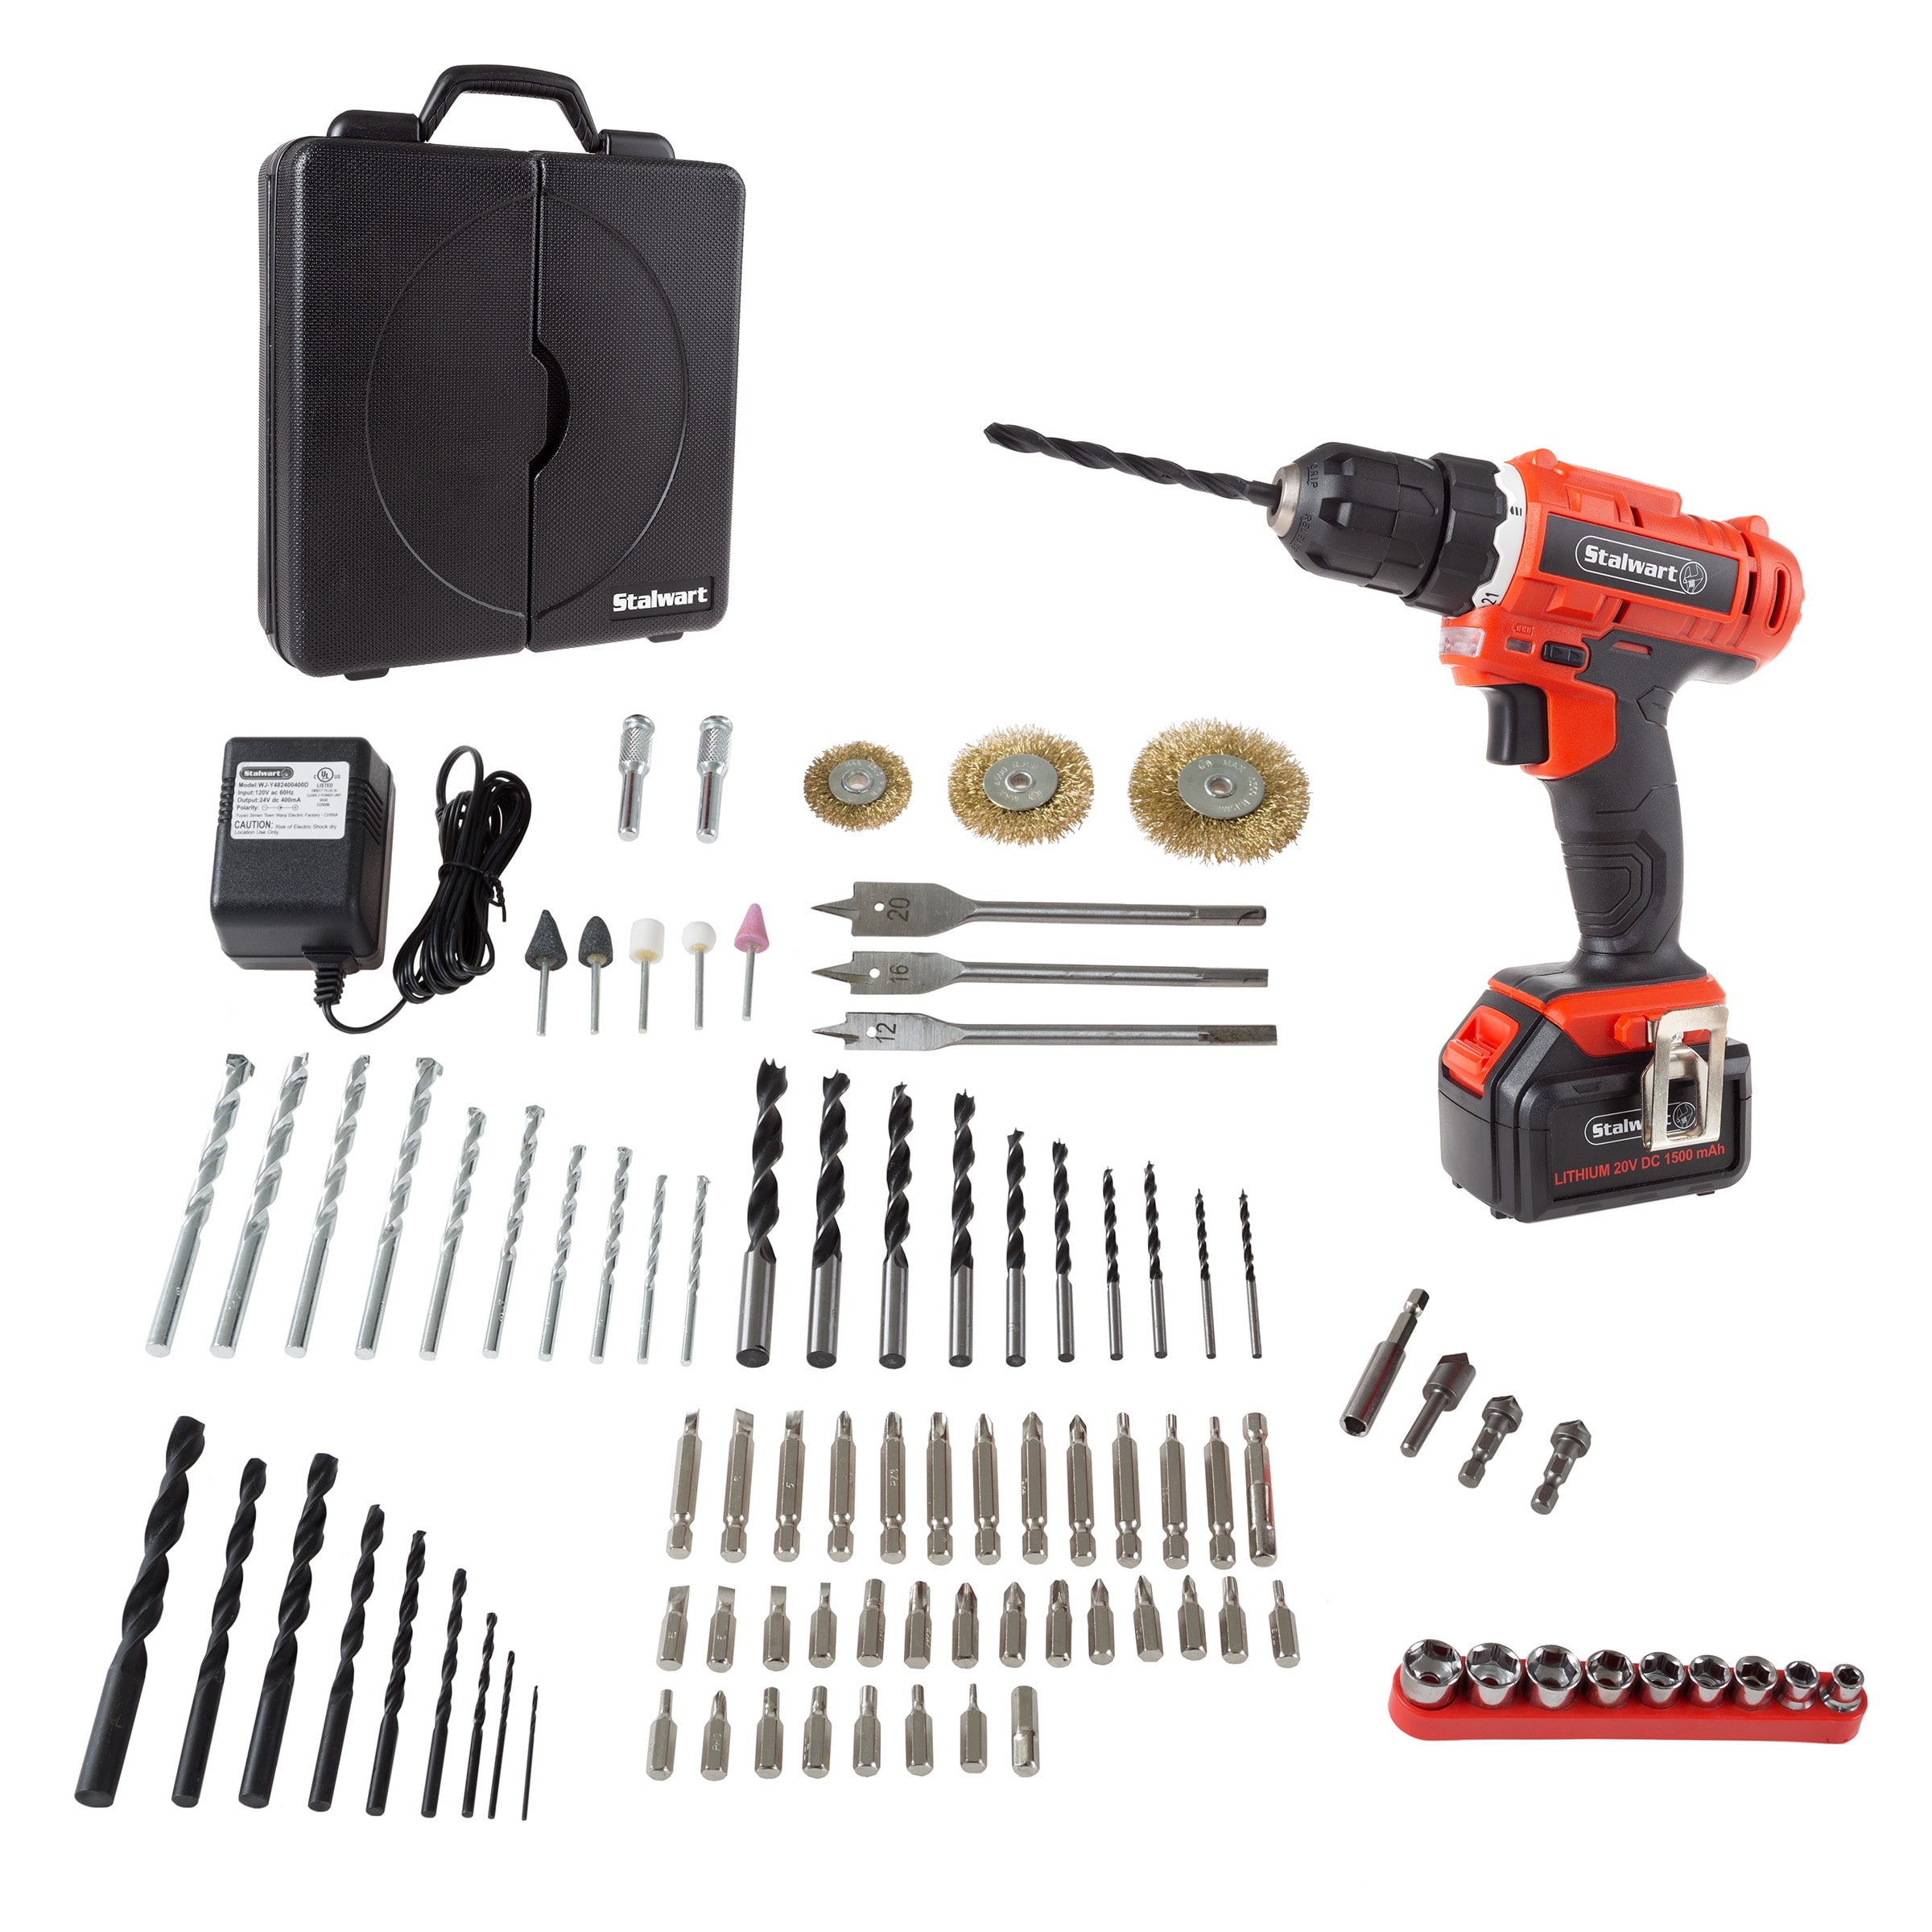 AVID POWER 20V MAX Lithium lon Cordless Drill Set, Power Drill Kit with  Battery and Charger, 3/8-Inch Keyless Chuck, Variable Speed, 16 Position  and